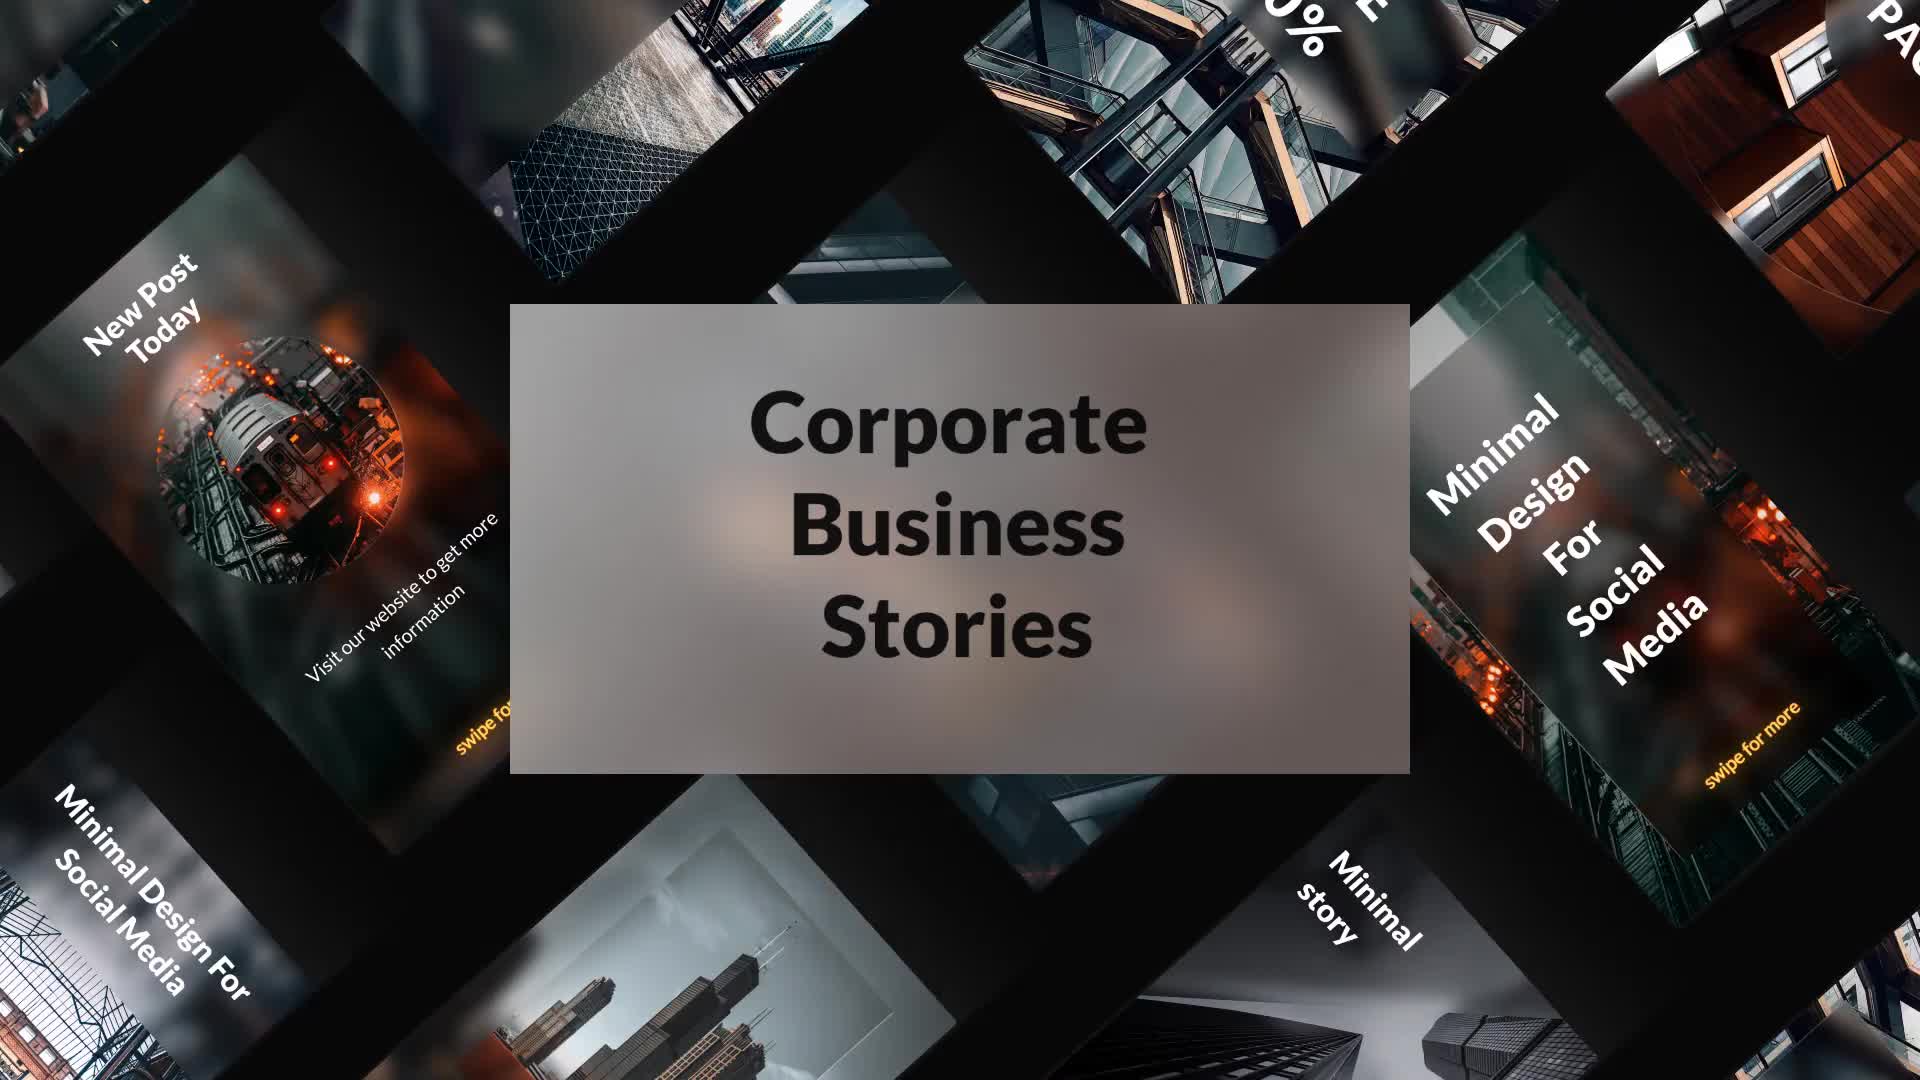  Corporate Business Stories 